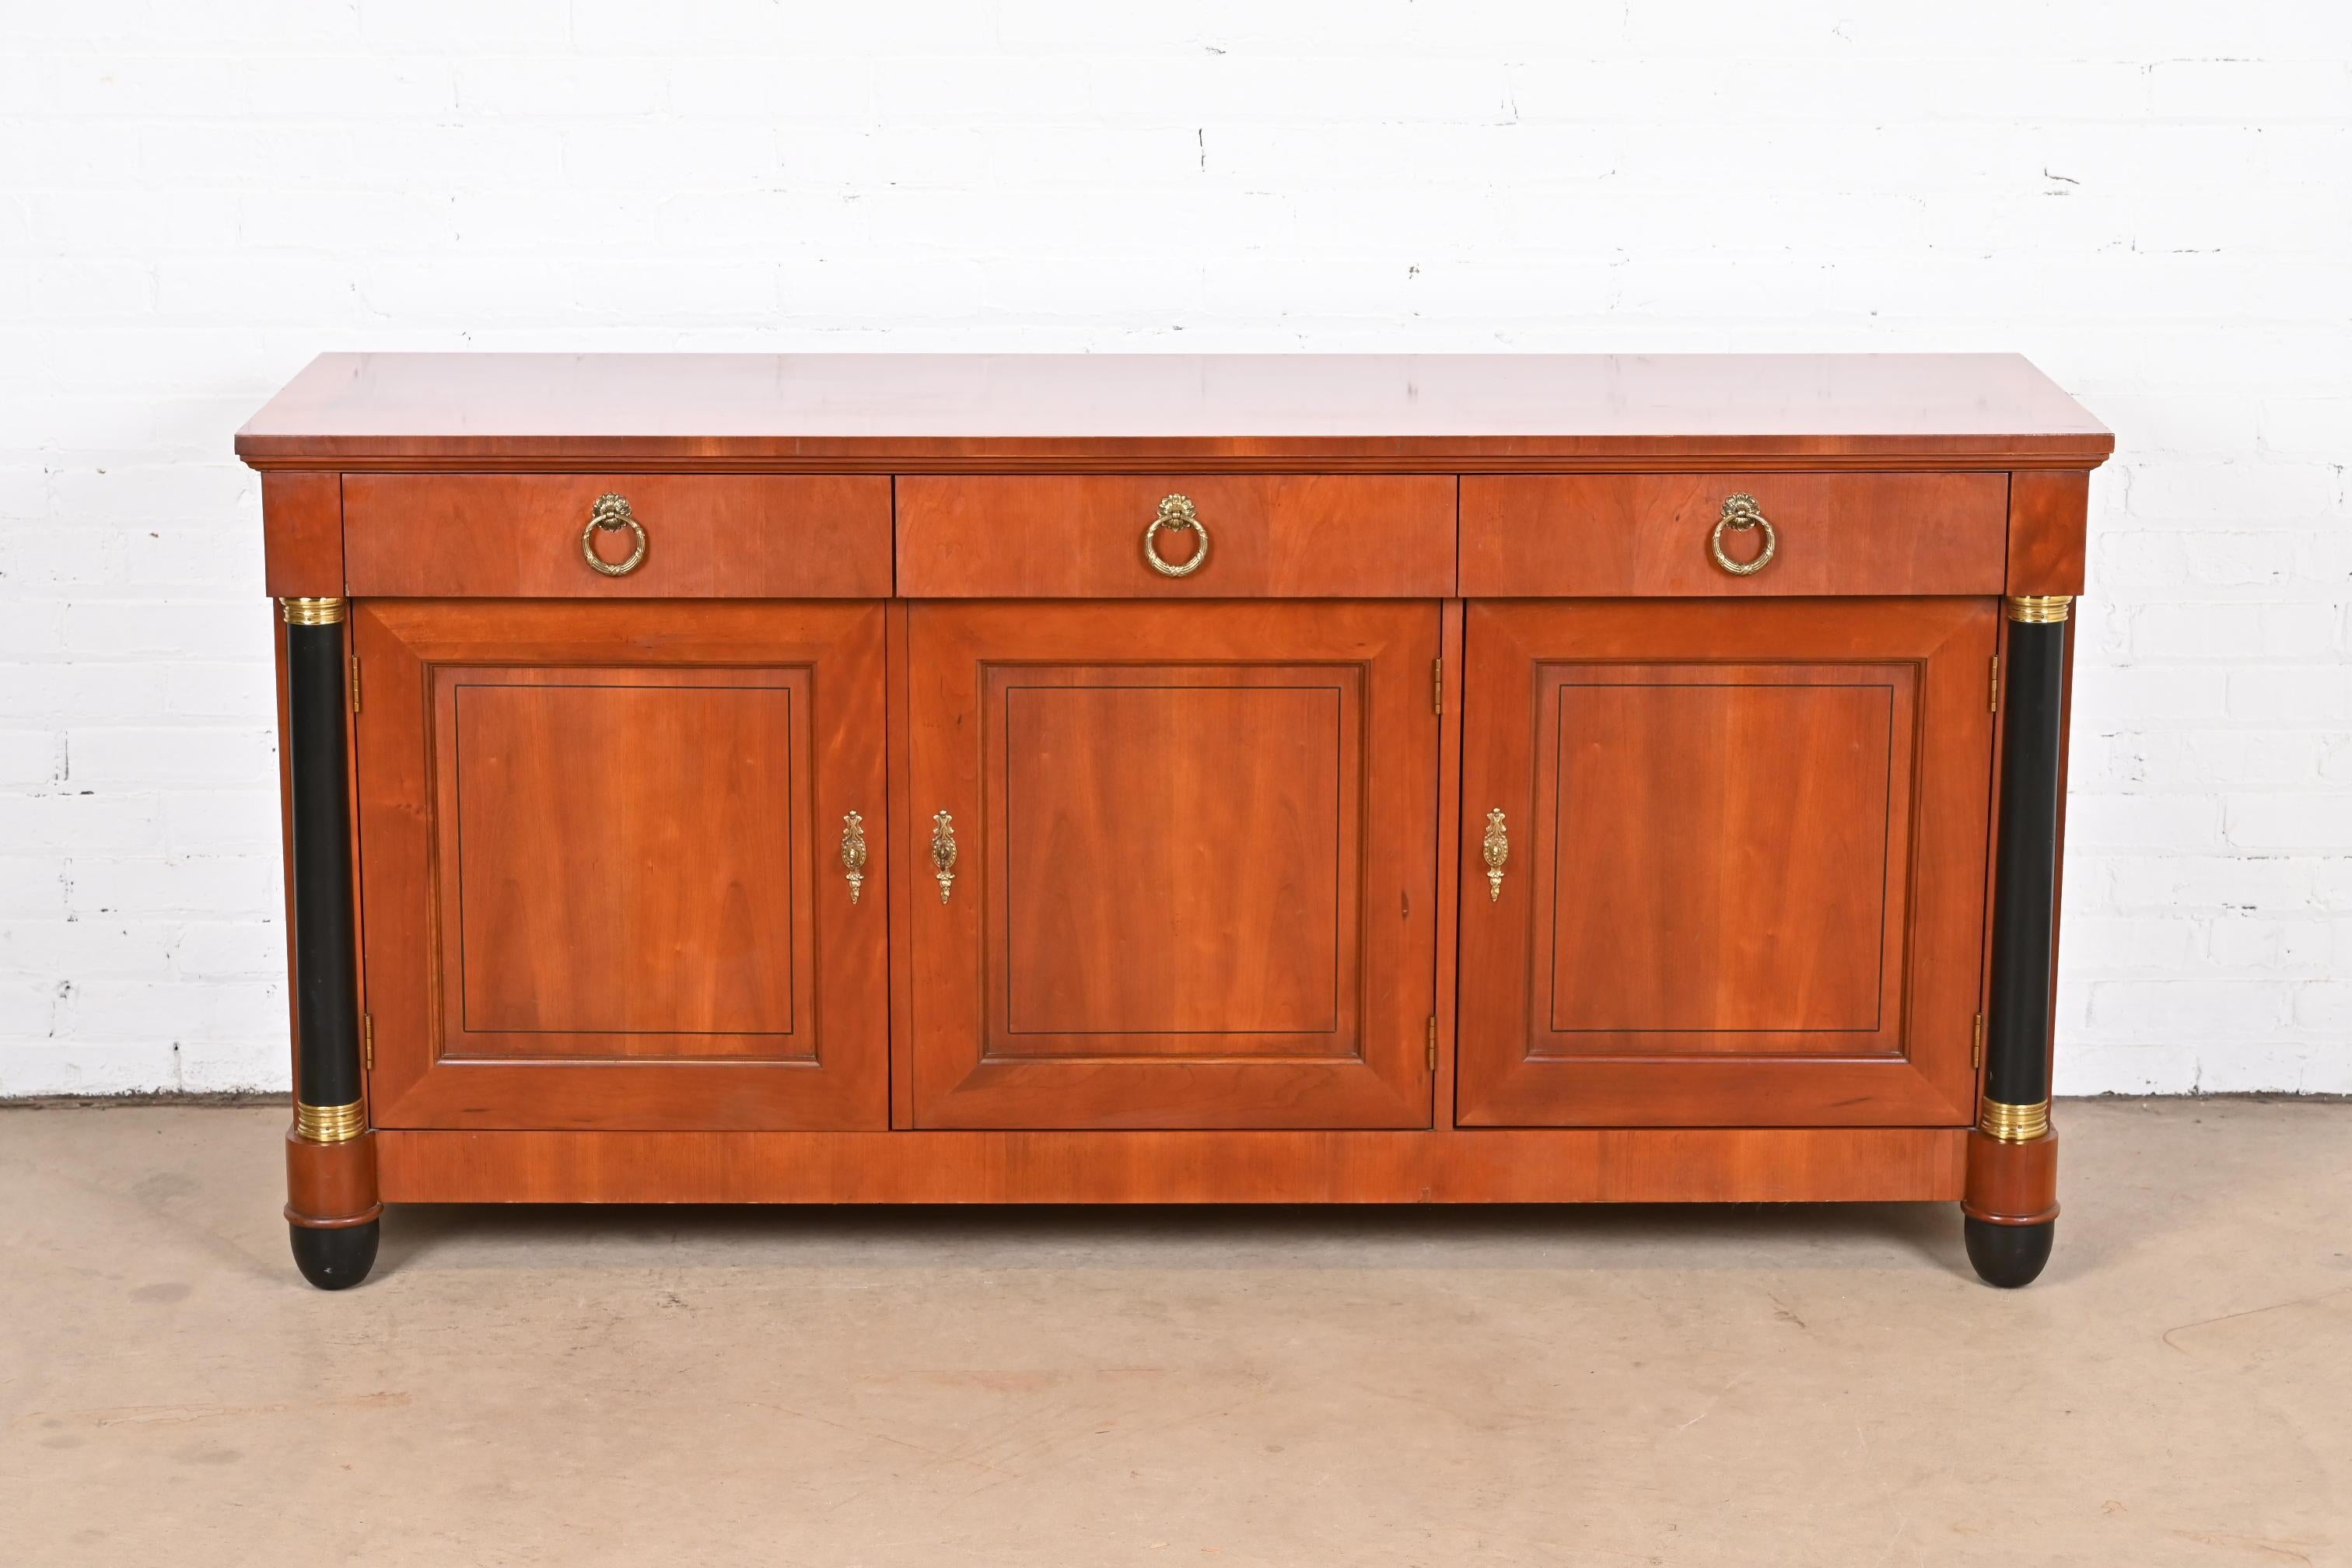 A gorgeous French Empire or Neoclassical style sideboard, credenza, or bar cabinet

By Baker Furniture

USA, circa 1980s

Carved cherry wood, with ebonized columns and feet, and original brass hardware.

Measures: 66